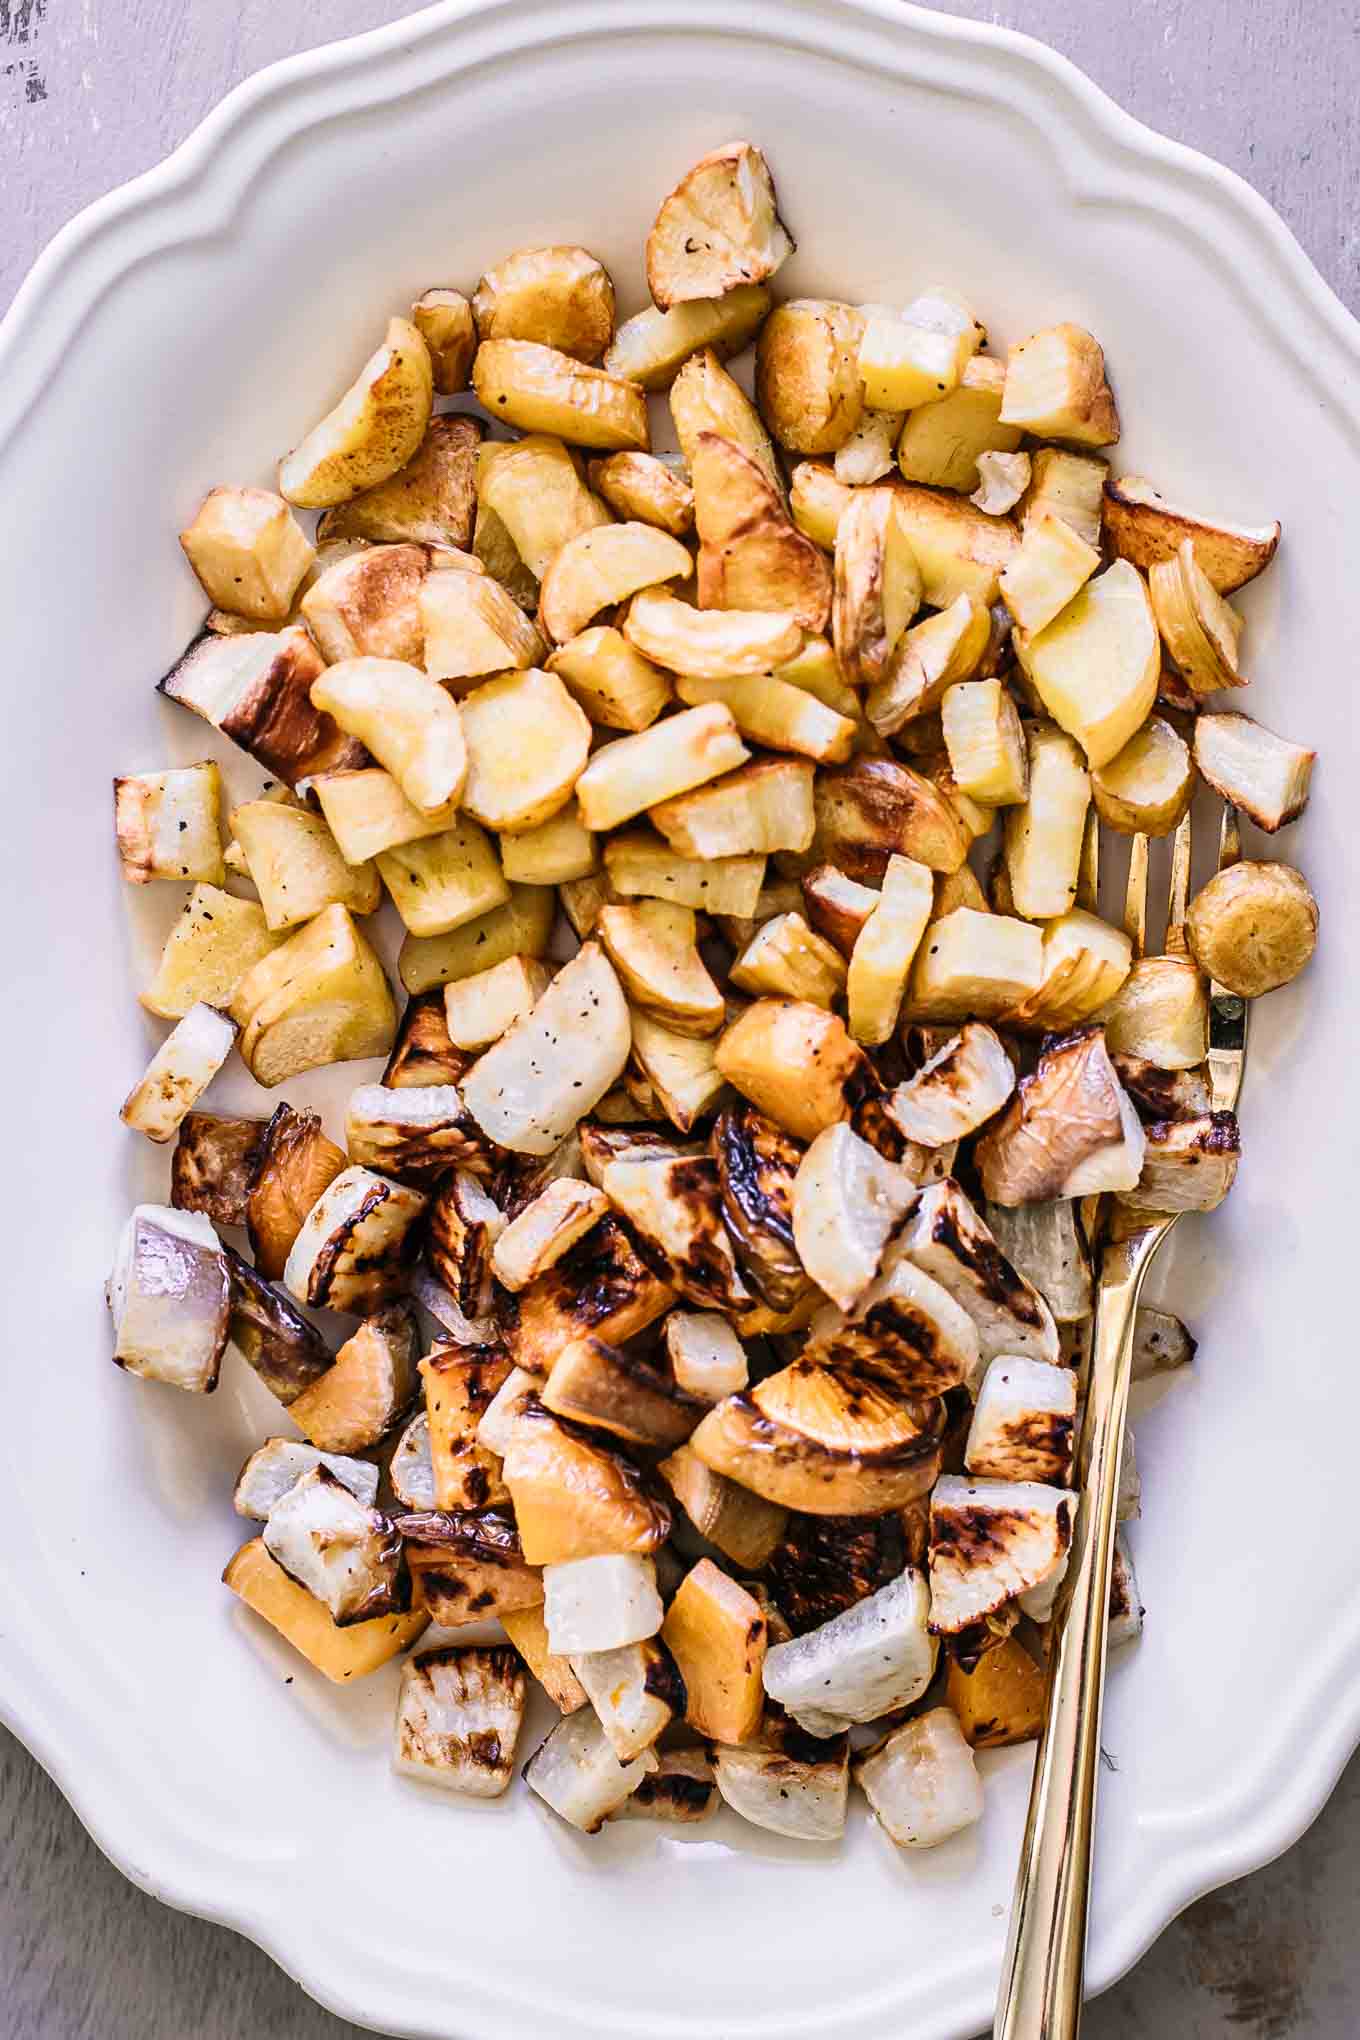 a close up photo of roasted turnips and parsnips on a white plate